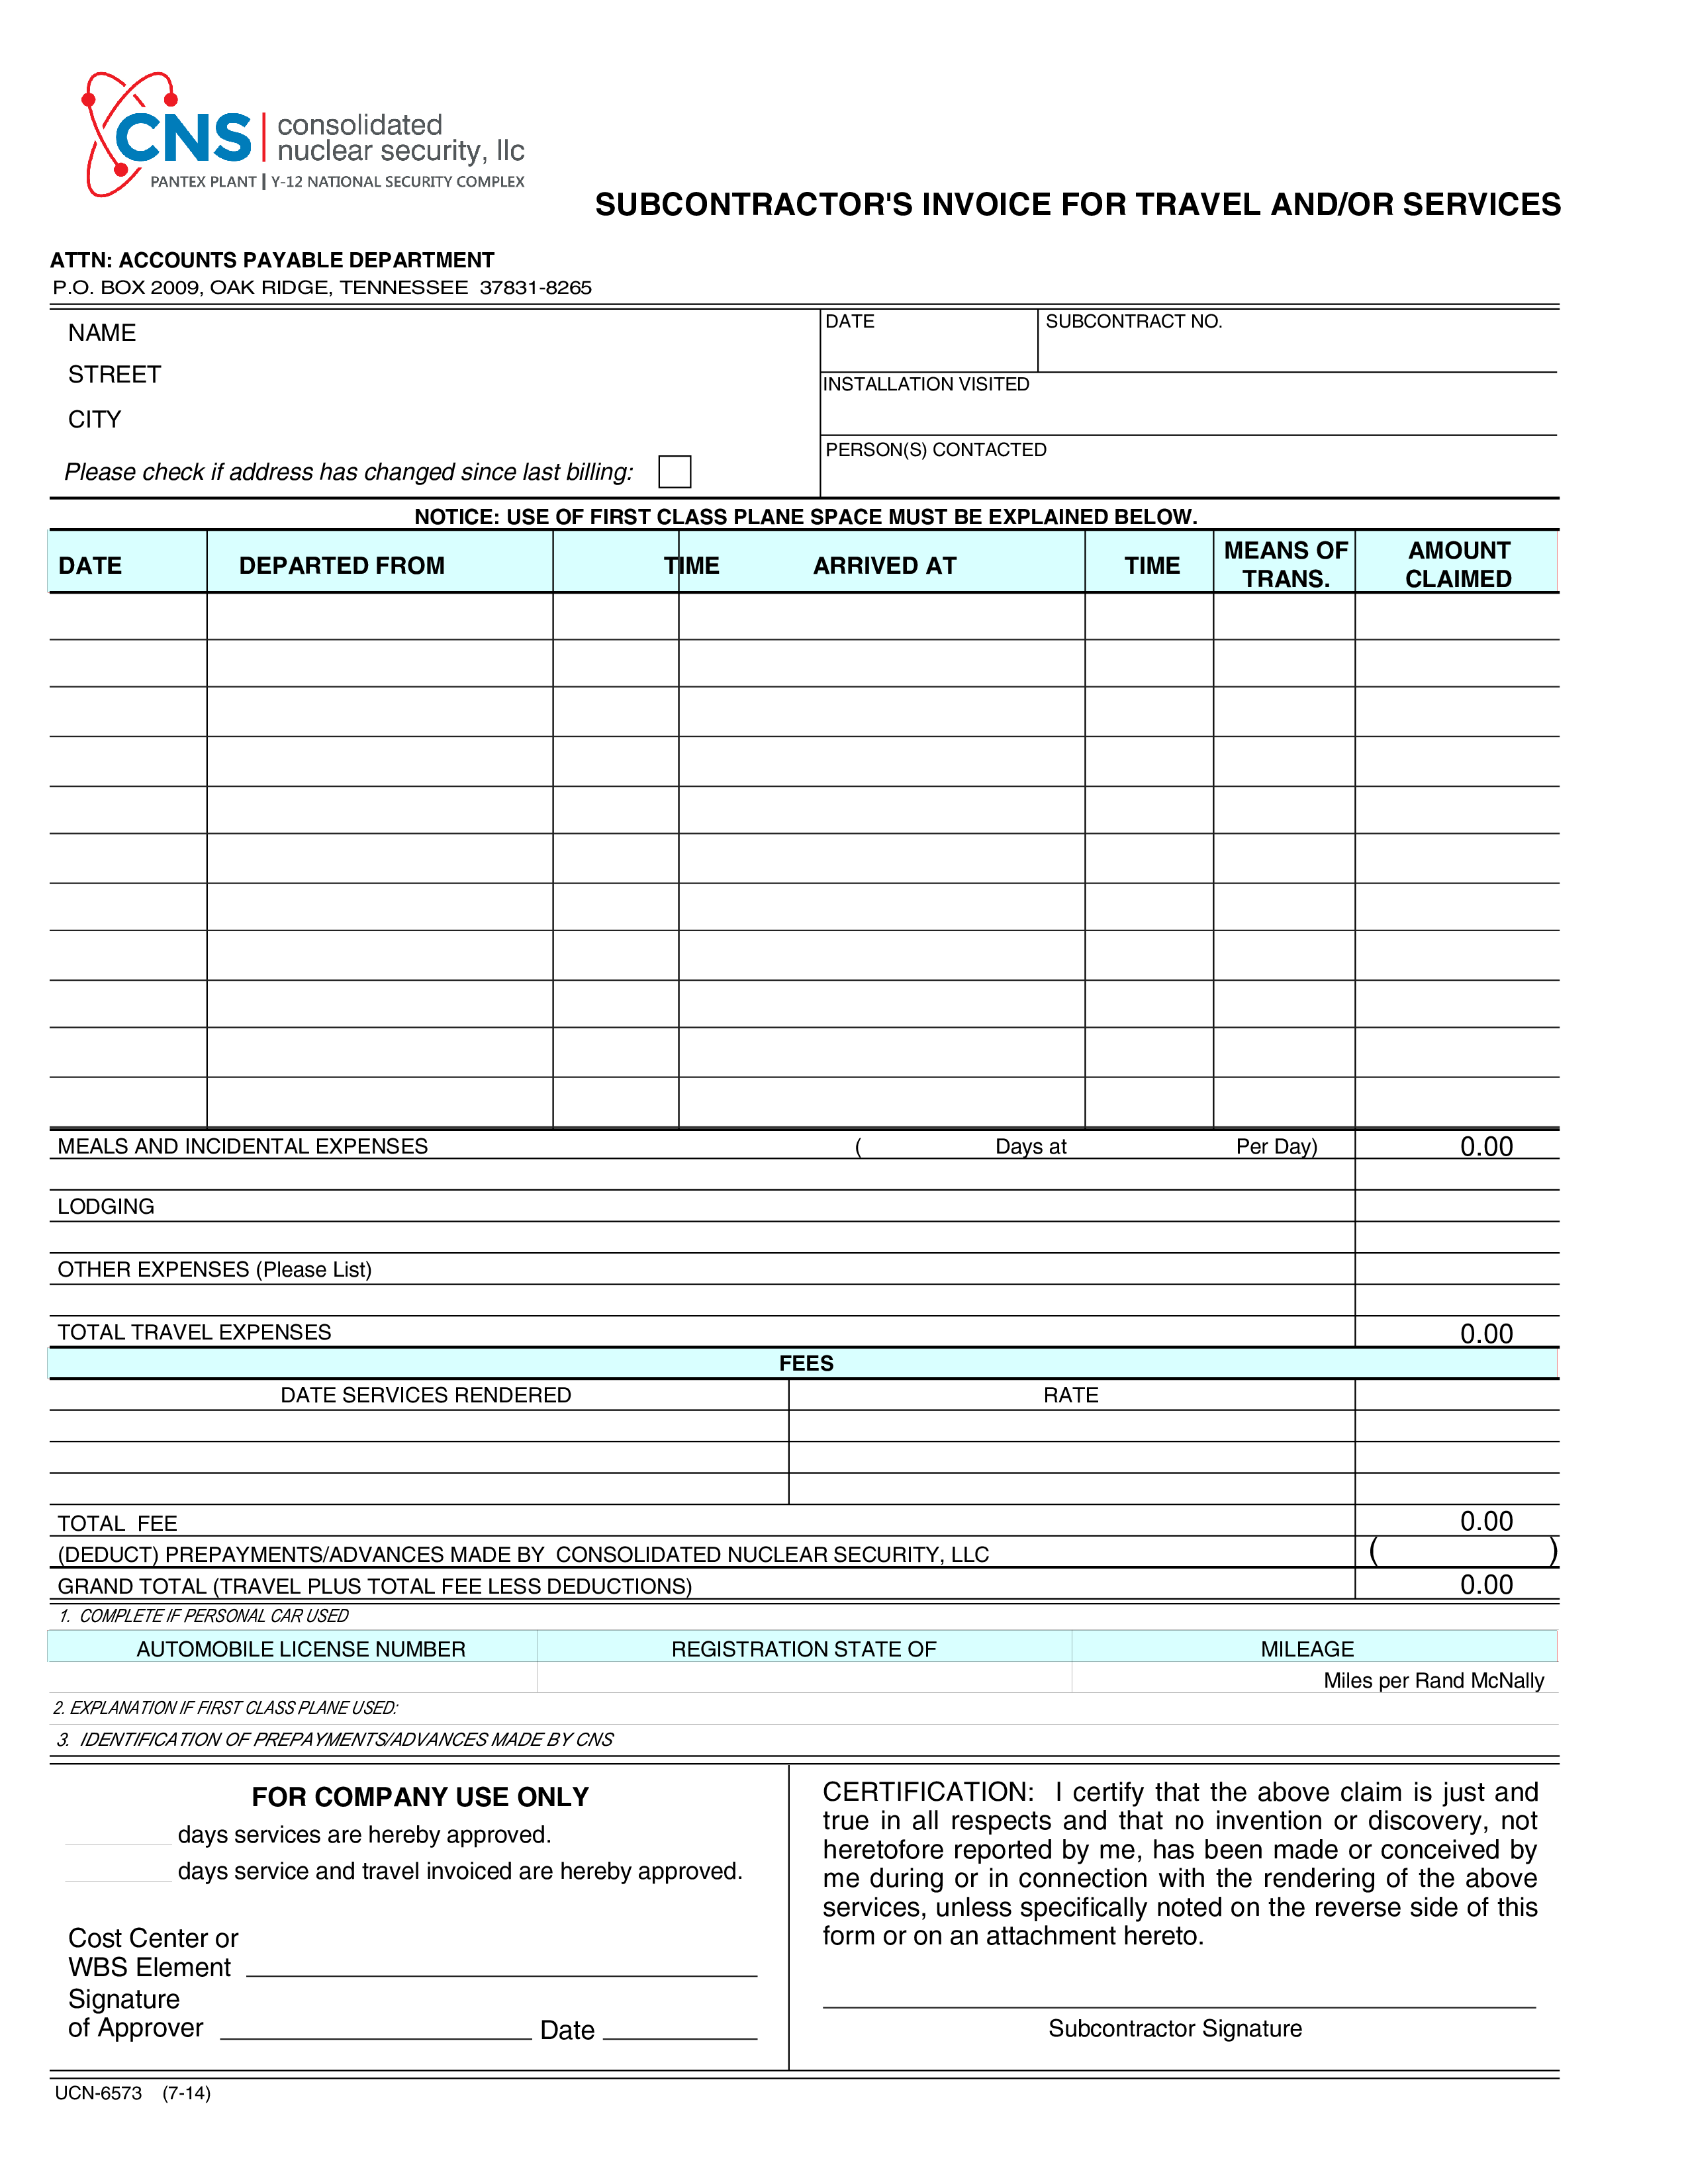 subcontractor invoice for travel and/or services modèles